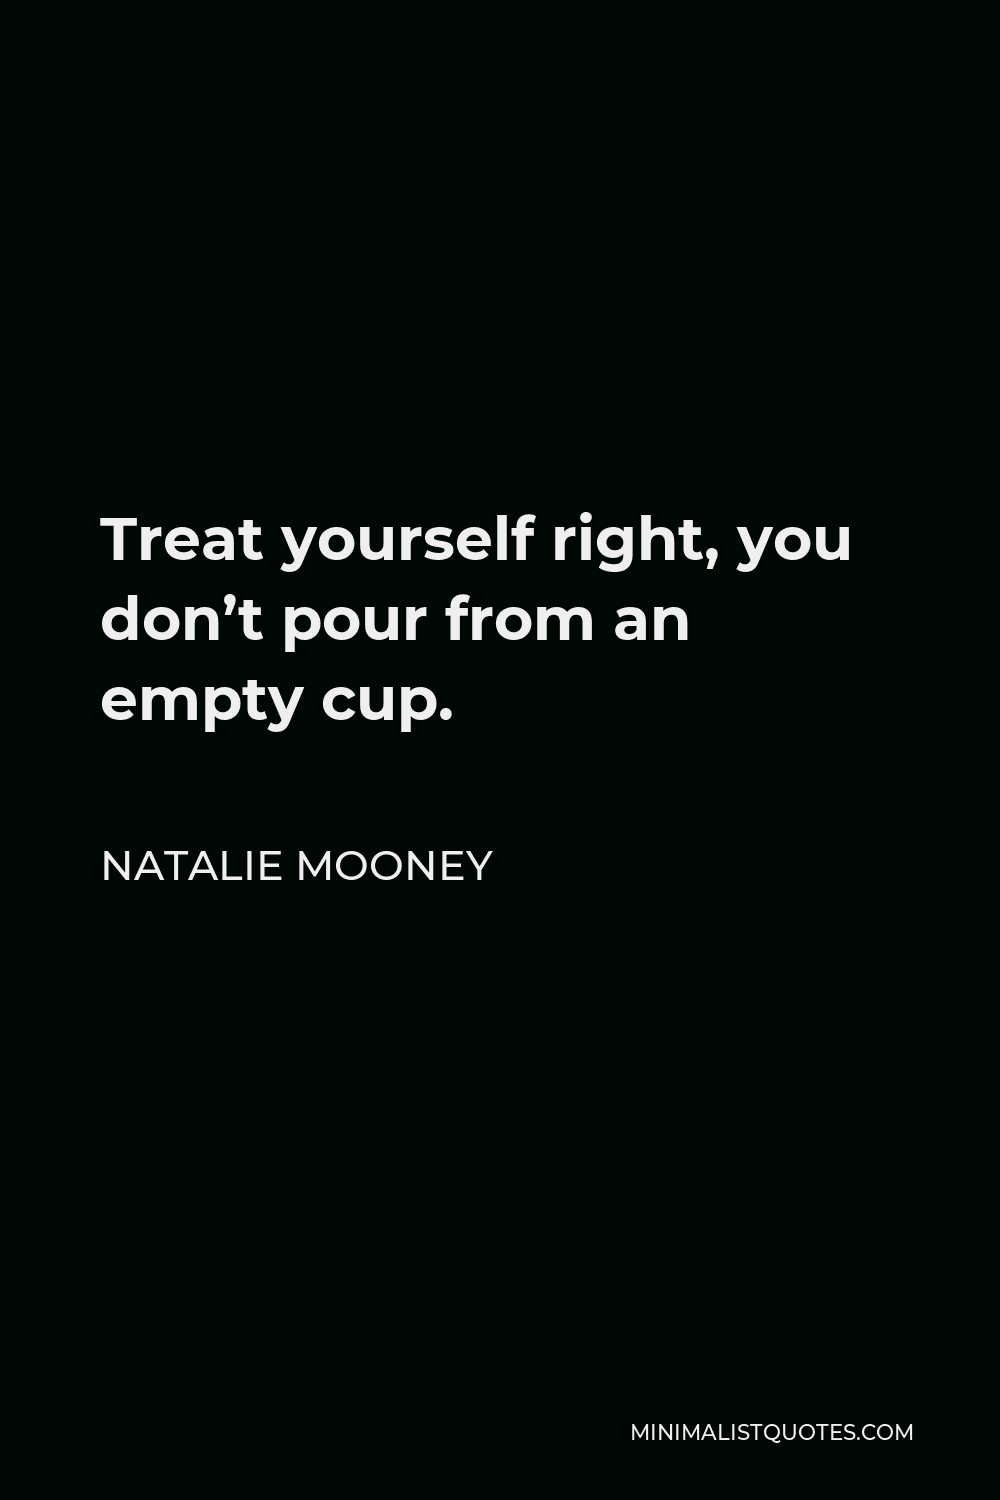 Natalie Mooney Quote - Treat yourself right, you don’t pour from an empty cup.